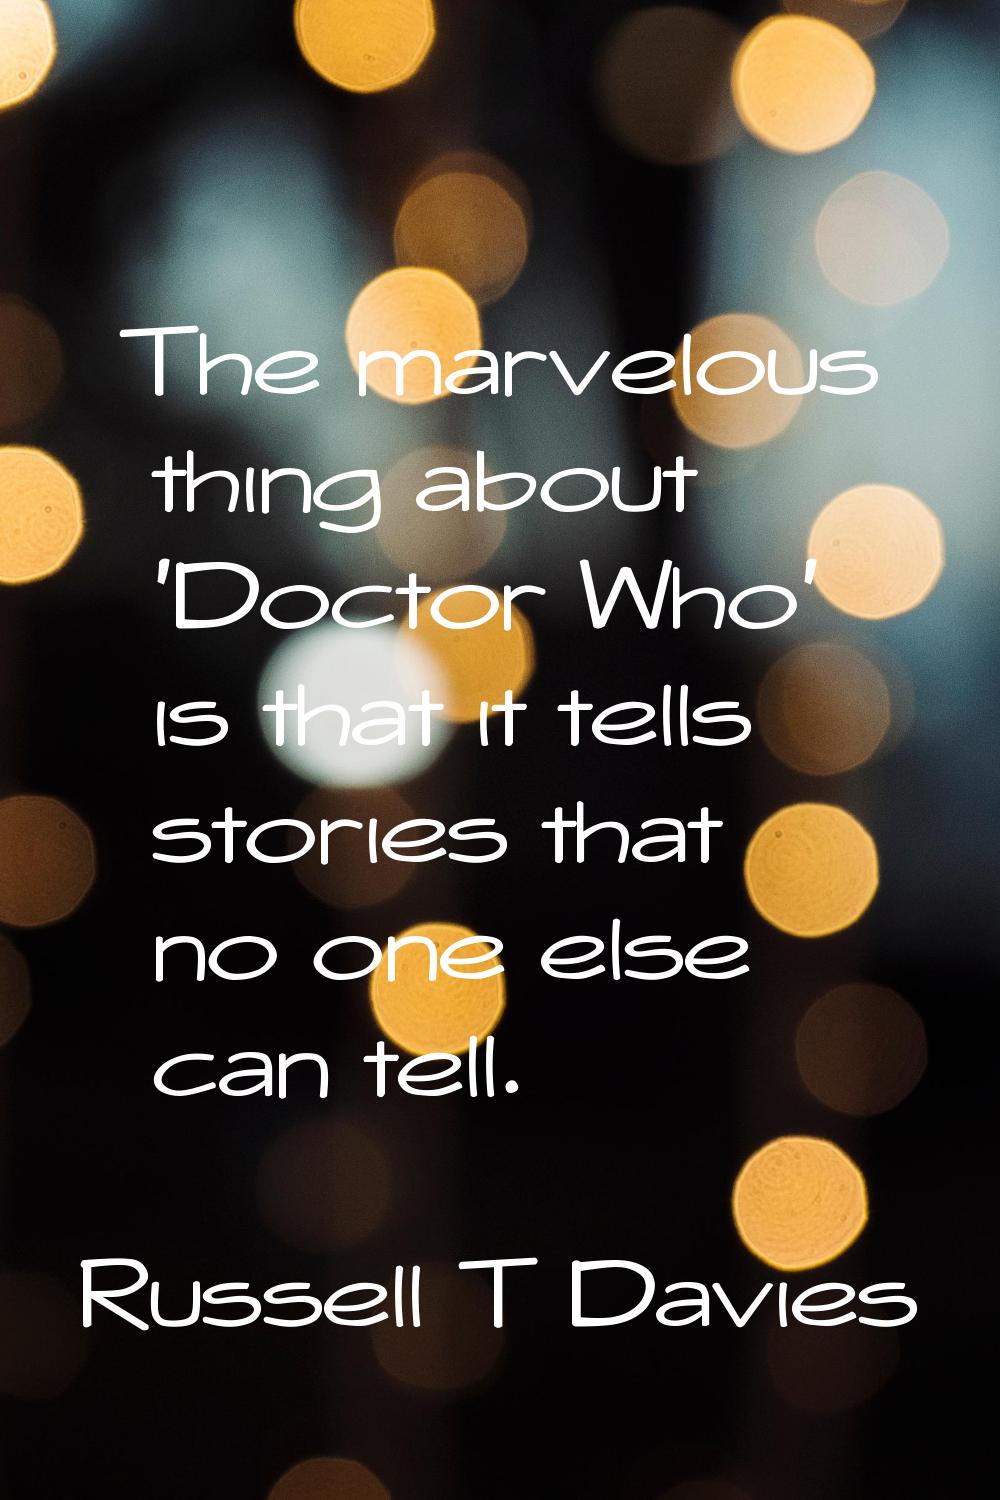 The marvelous thing about 'Doctor Who' is that it tells stories that no one else can tell.